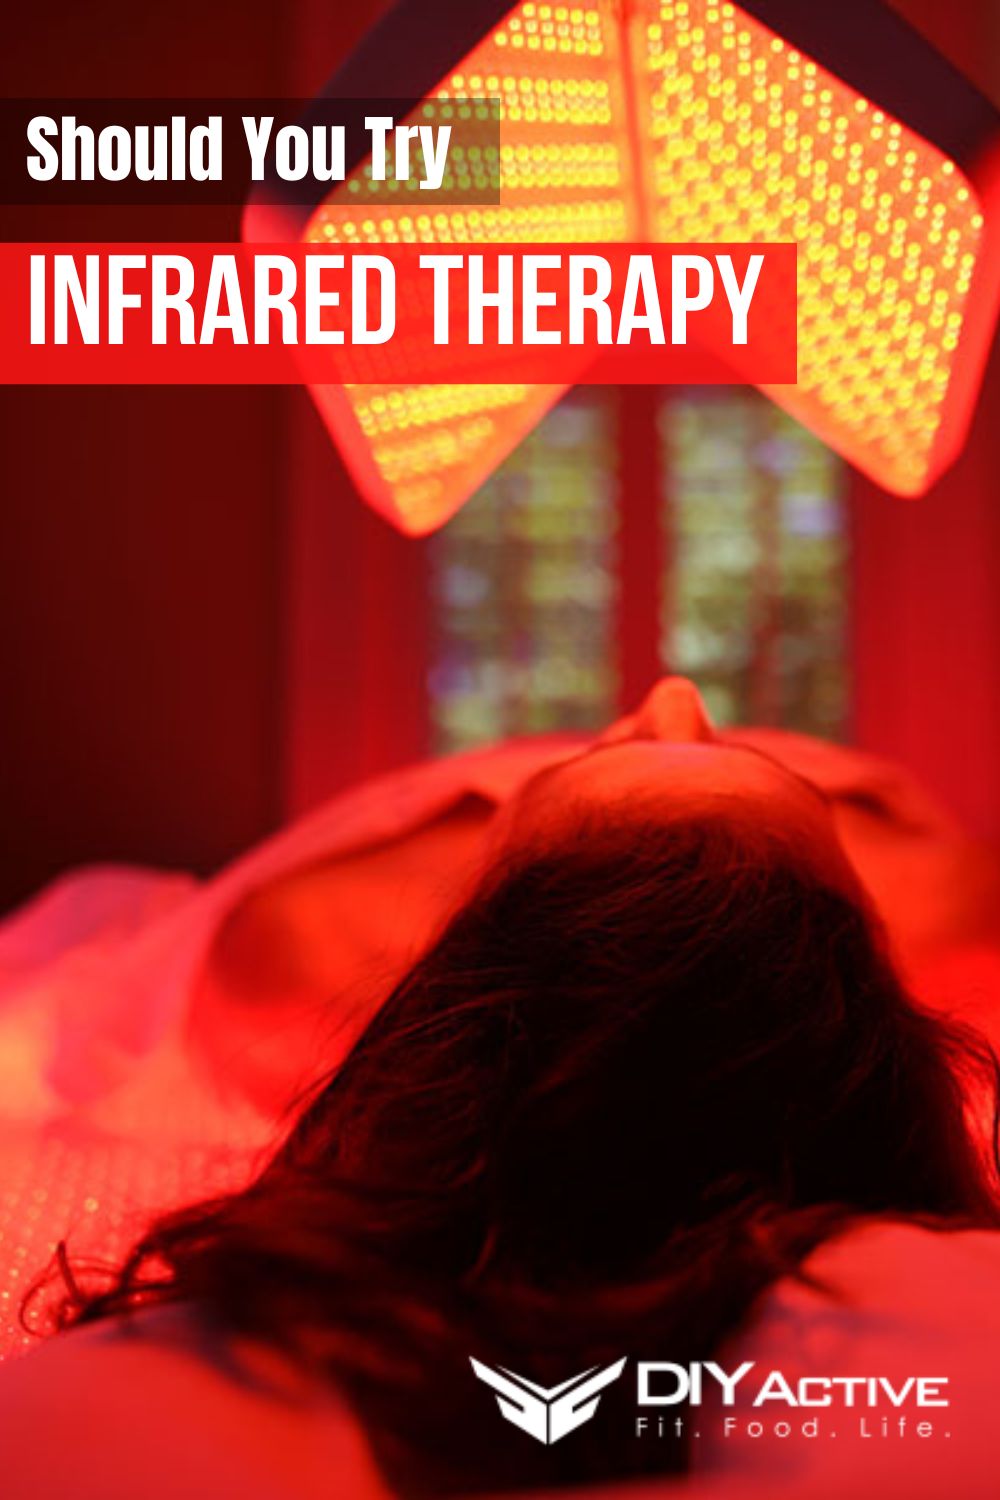 What Is Infrared Therapy? Should You Try It?